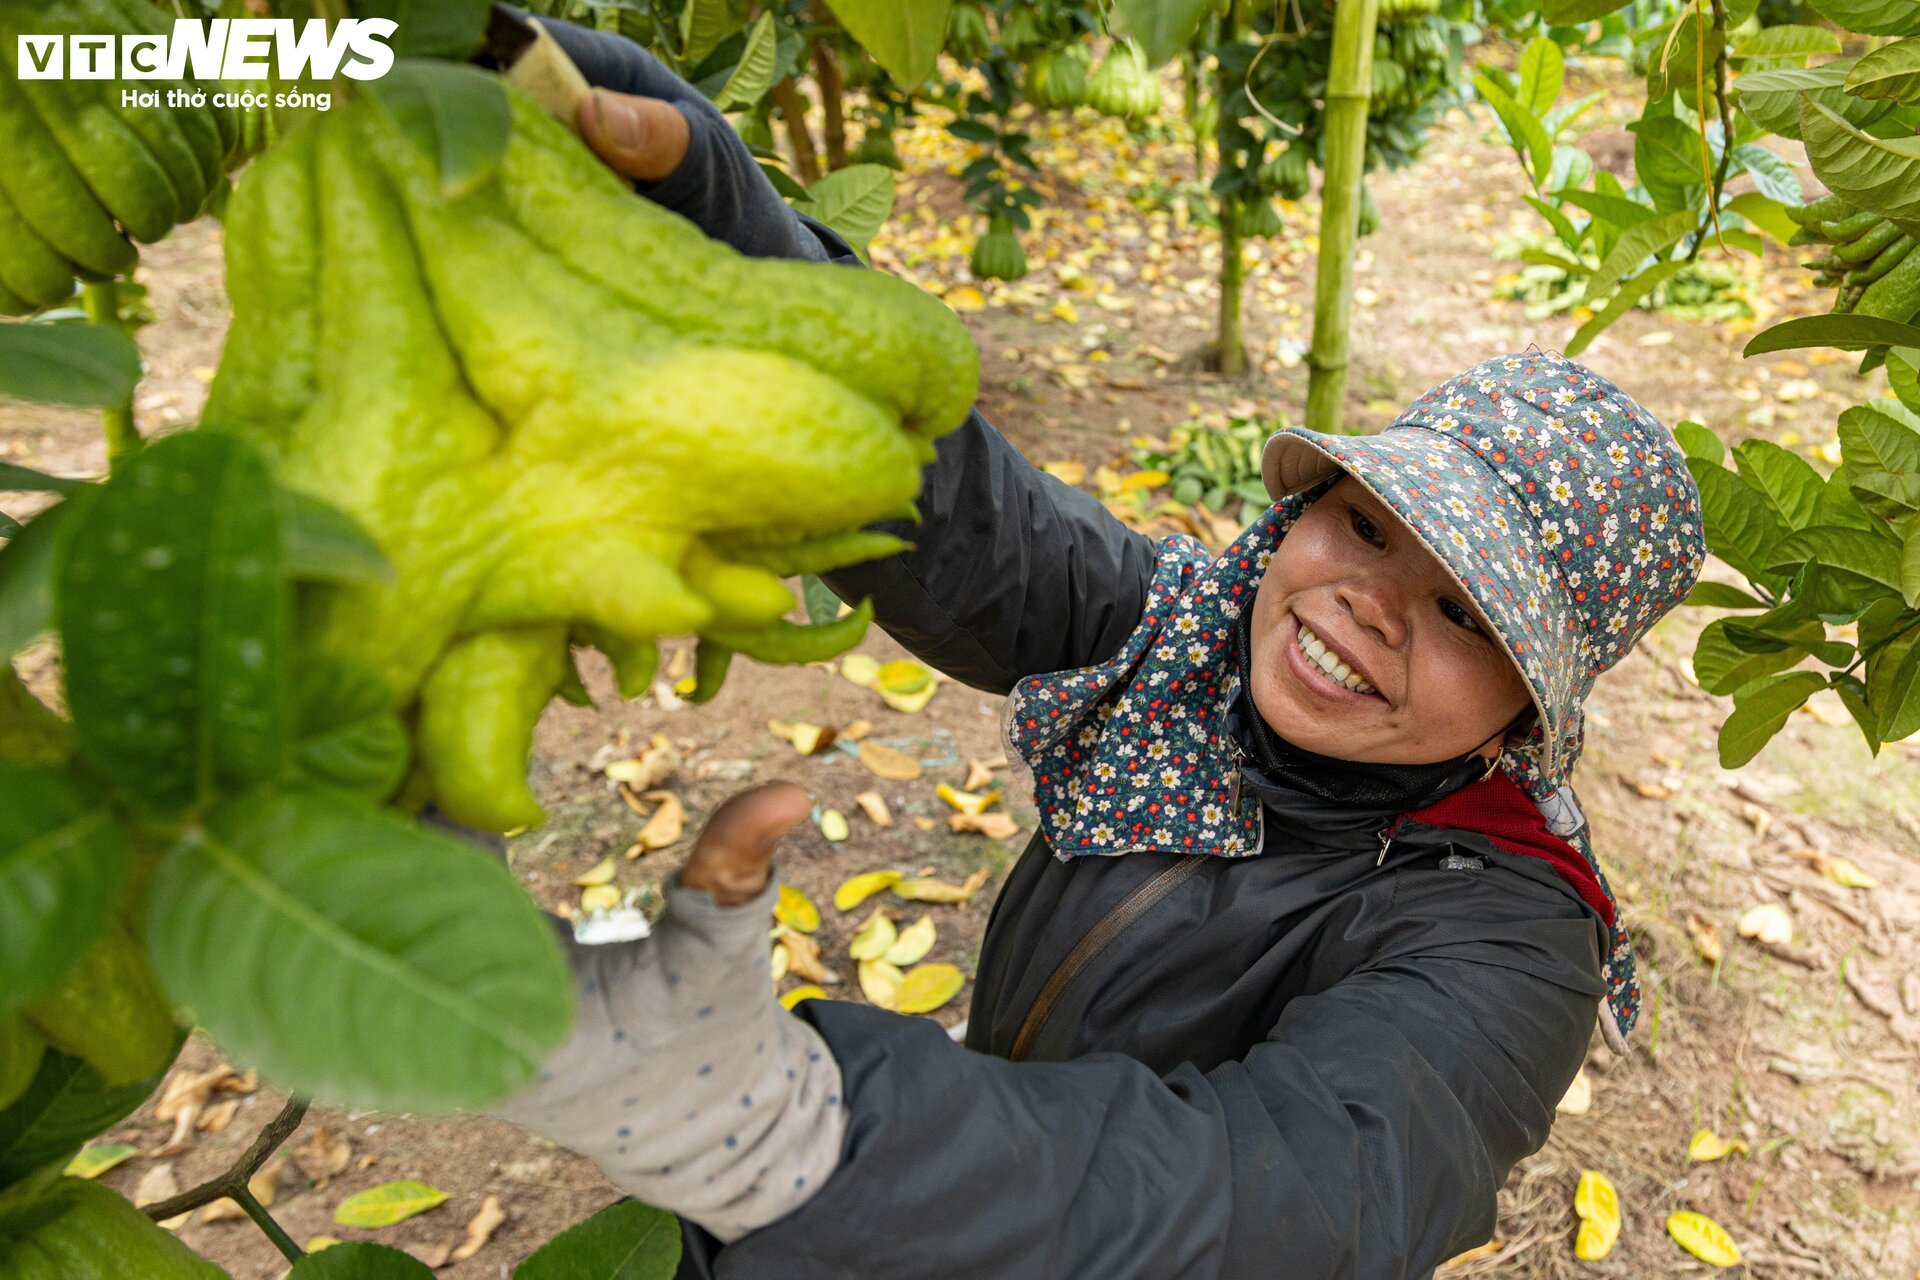 Busy with harvesting, people planted Buddha's hands in Hanoi with a bountiful harvest - Photo 5.